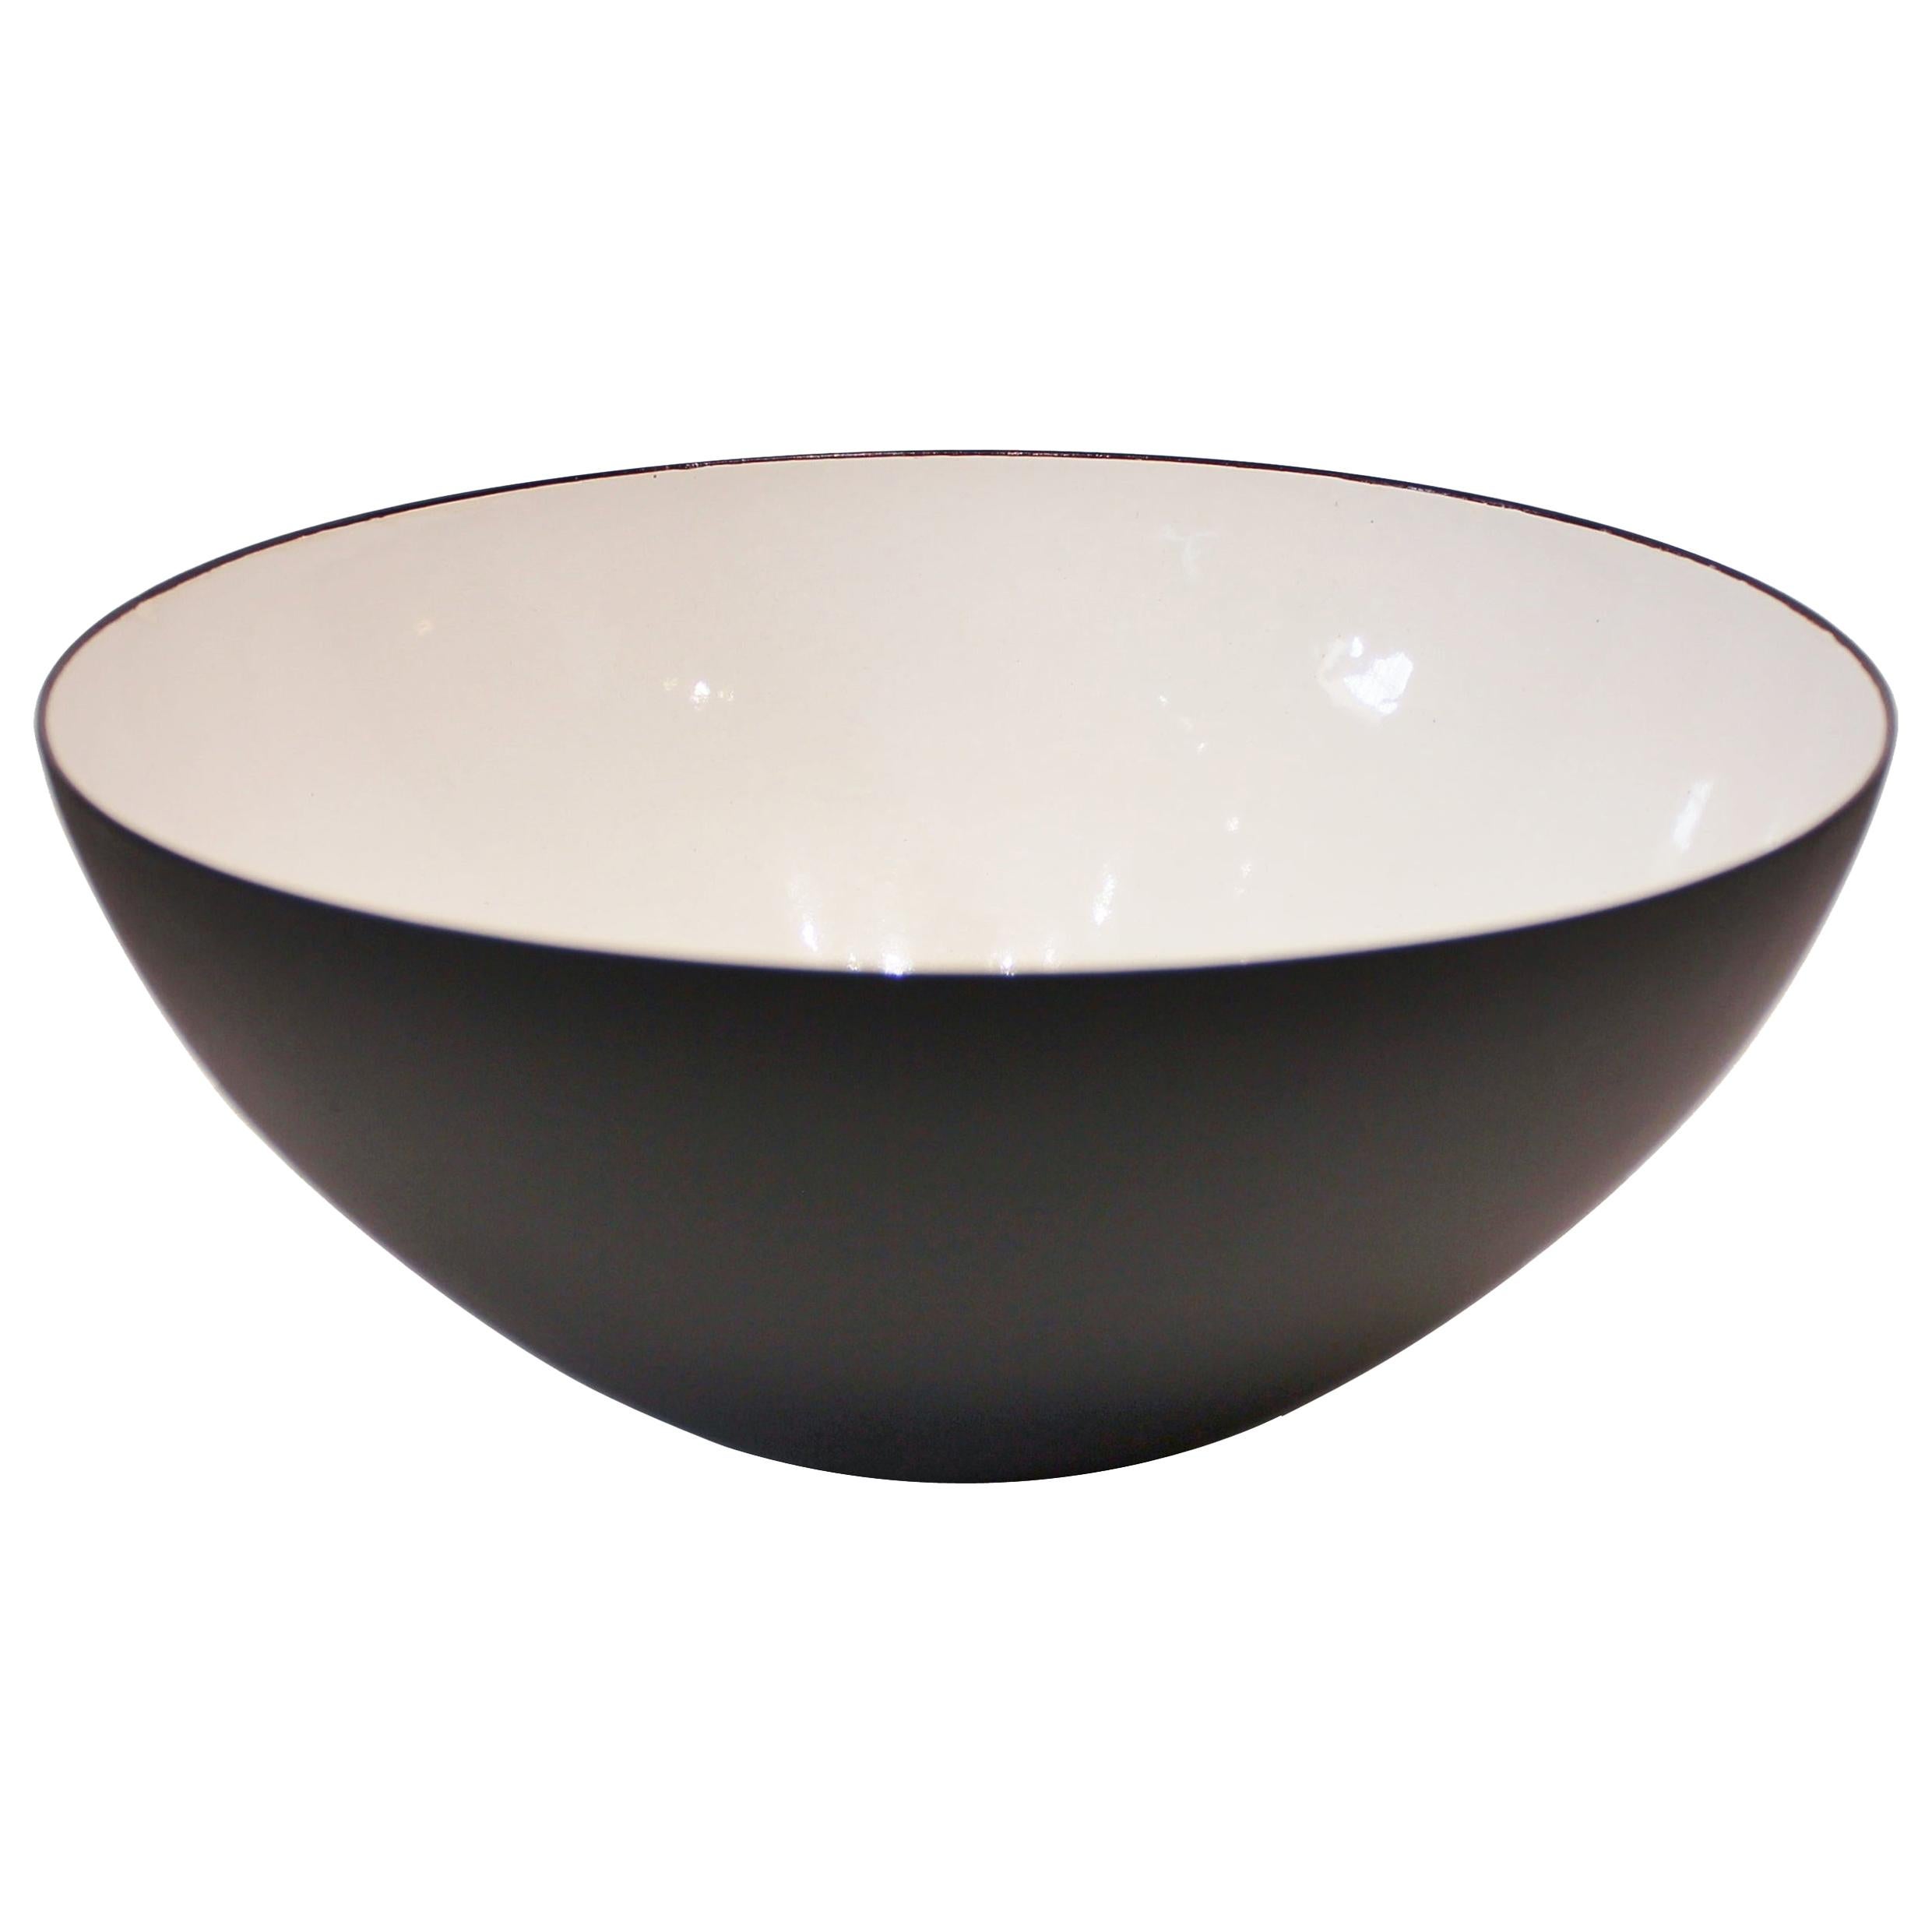 Krenit Bowl by Herbert Krenchel of Black Metal and White Enamel from the 1960s For Sale